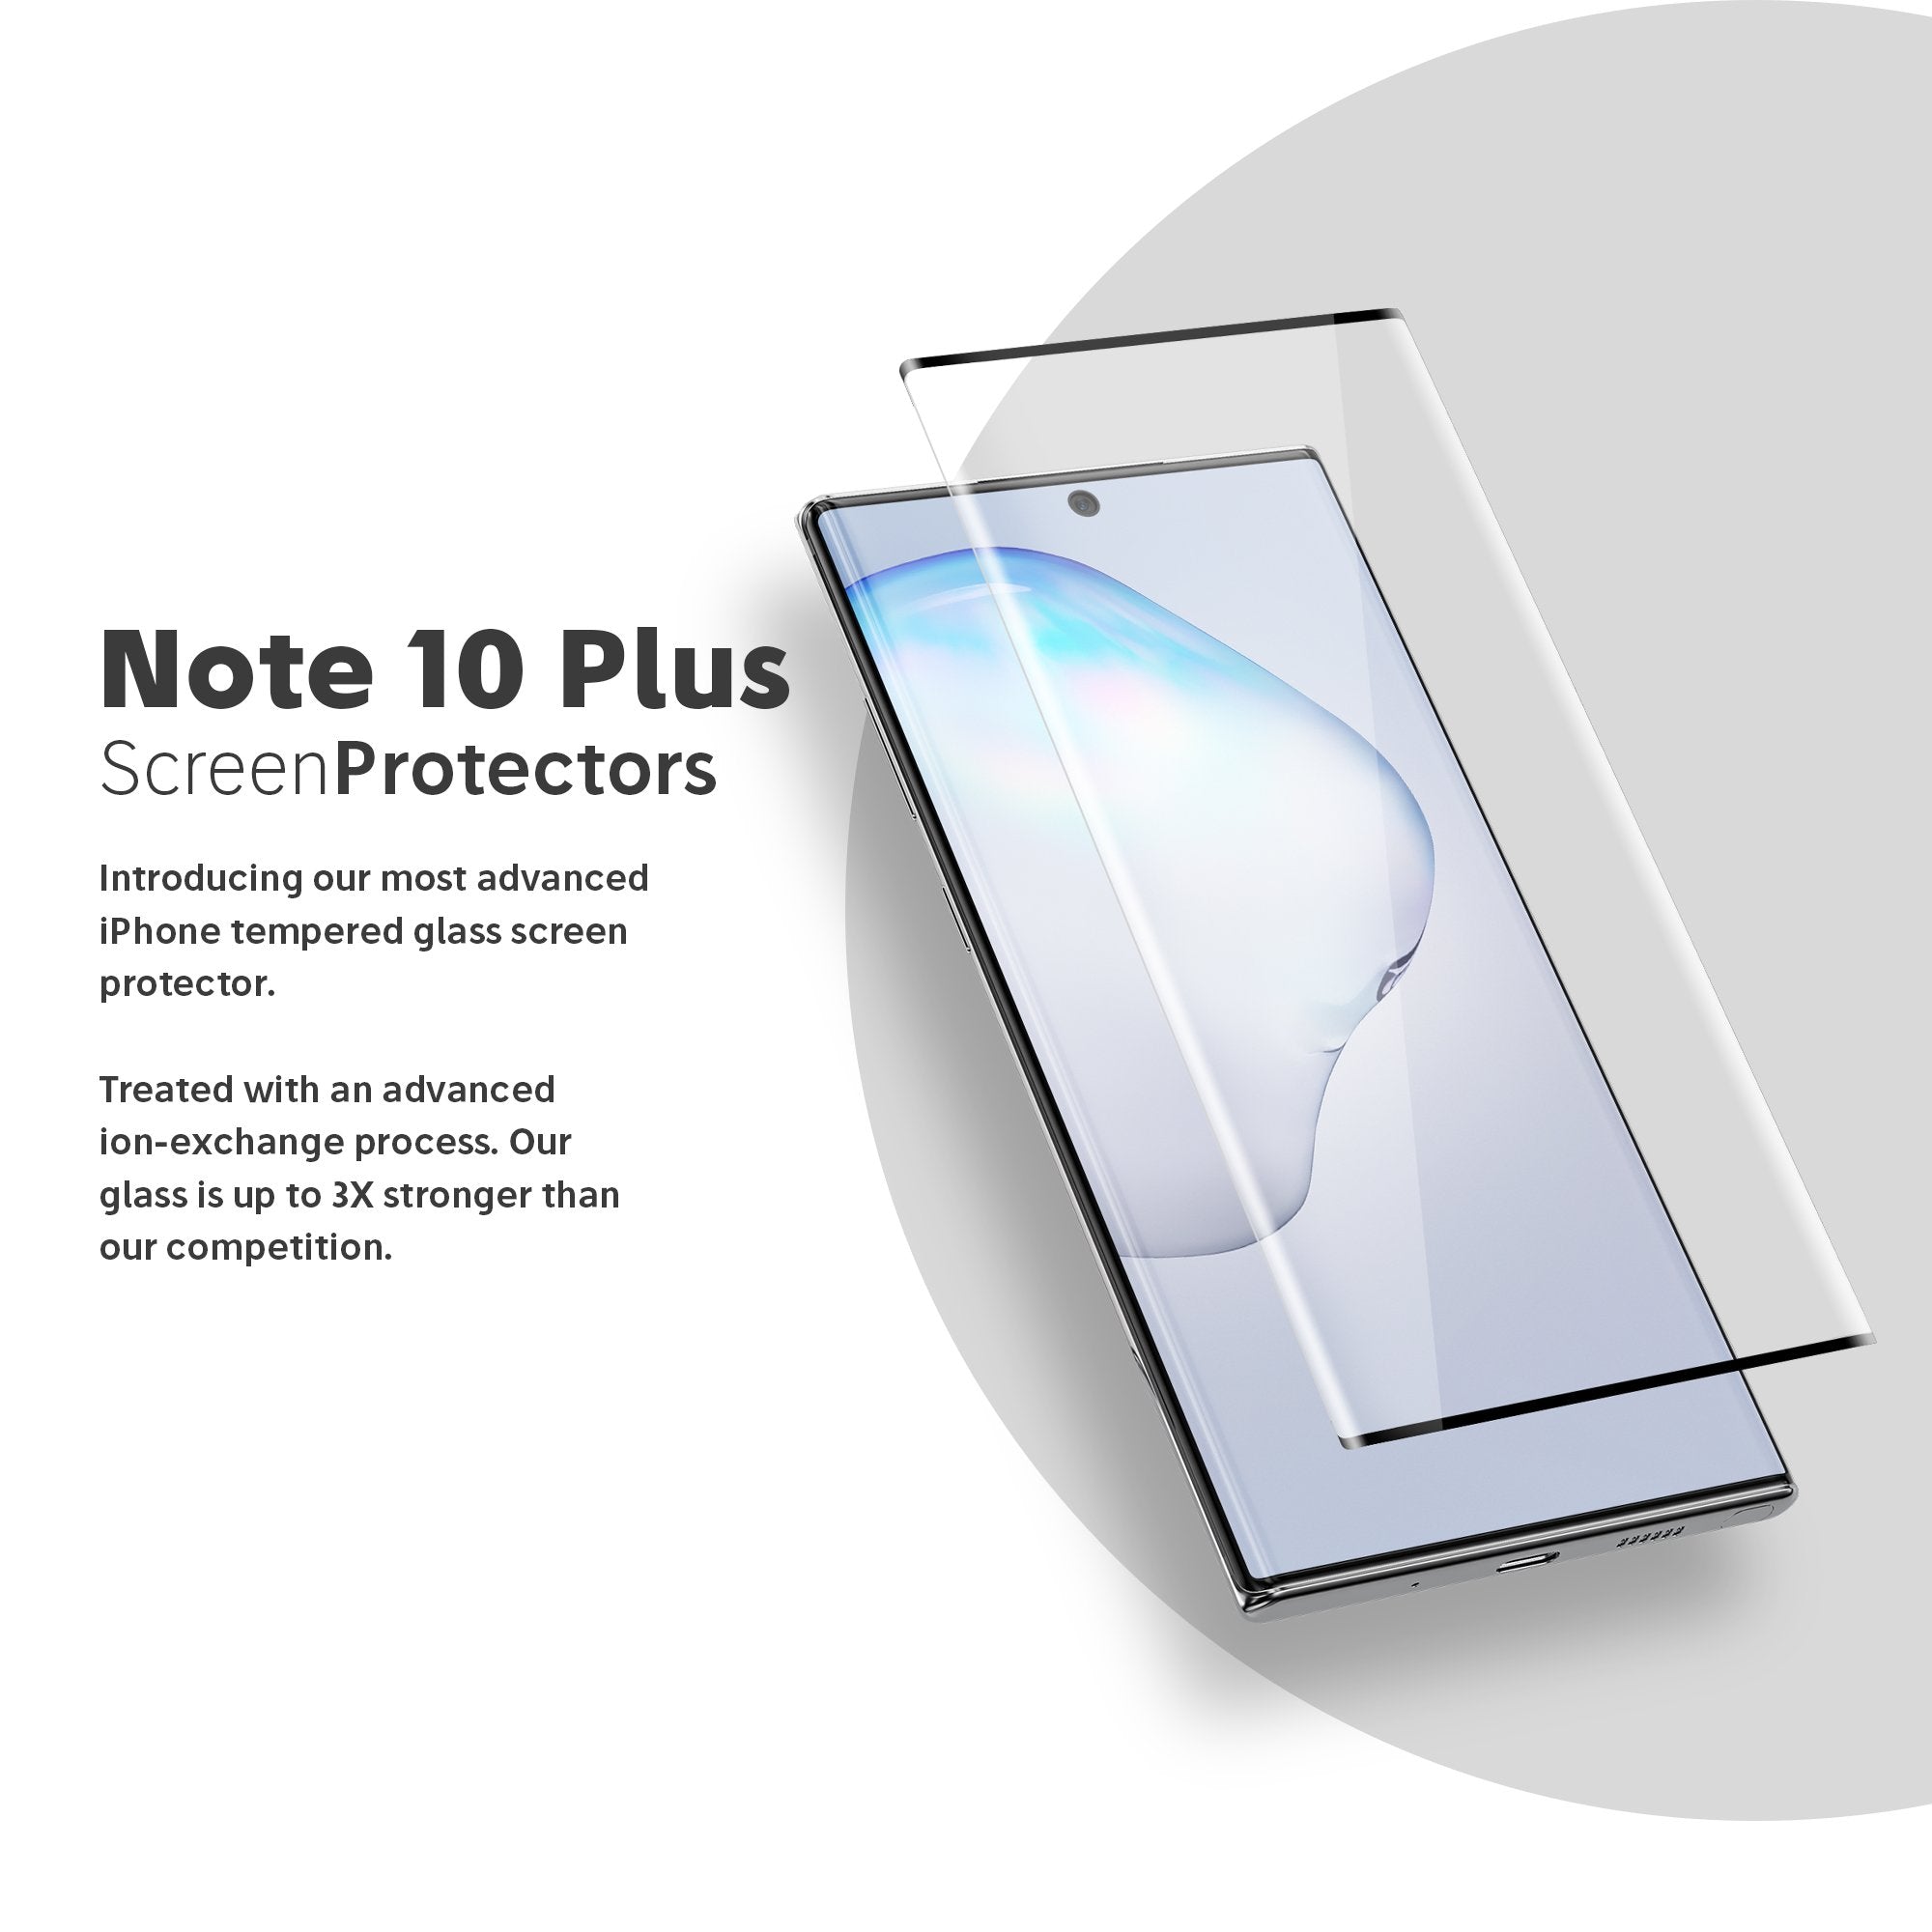 NanoArmour Best Samsung Galaxy Note 10 Plus Screen Protector